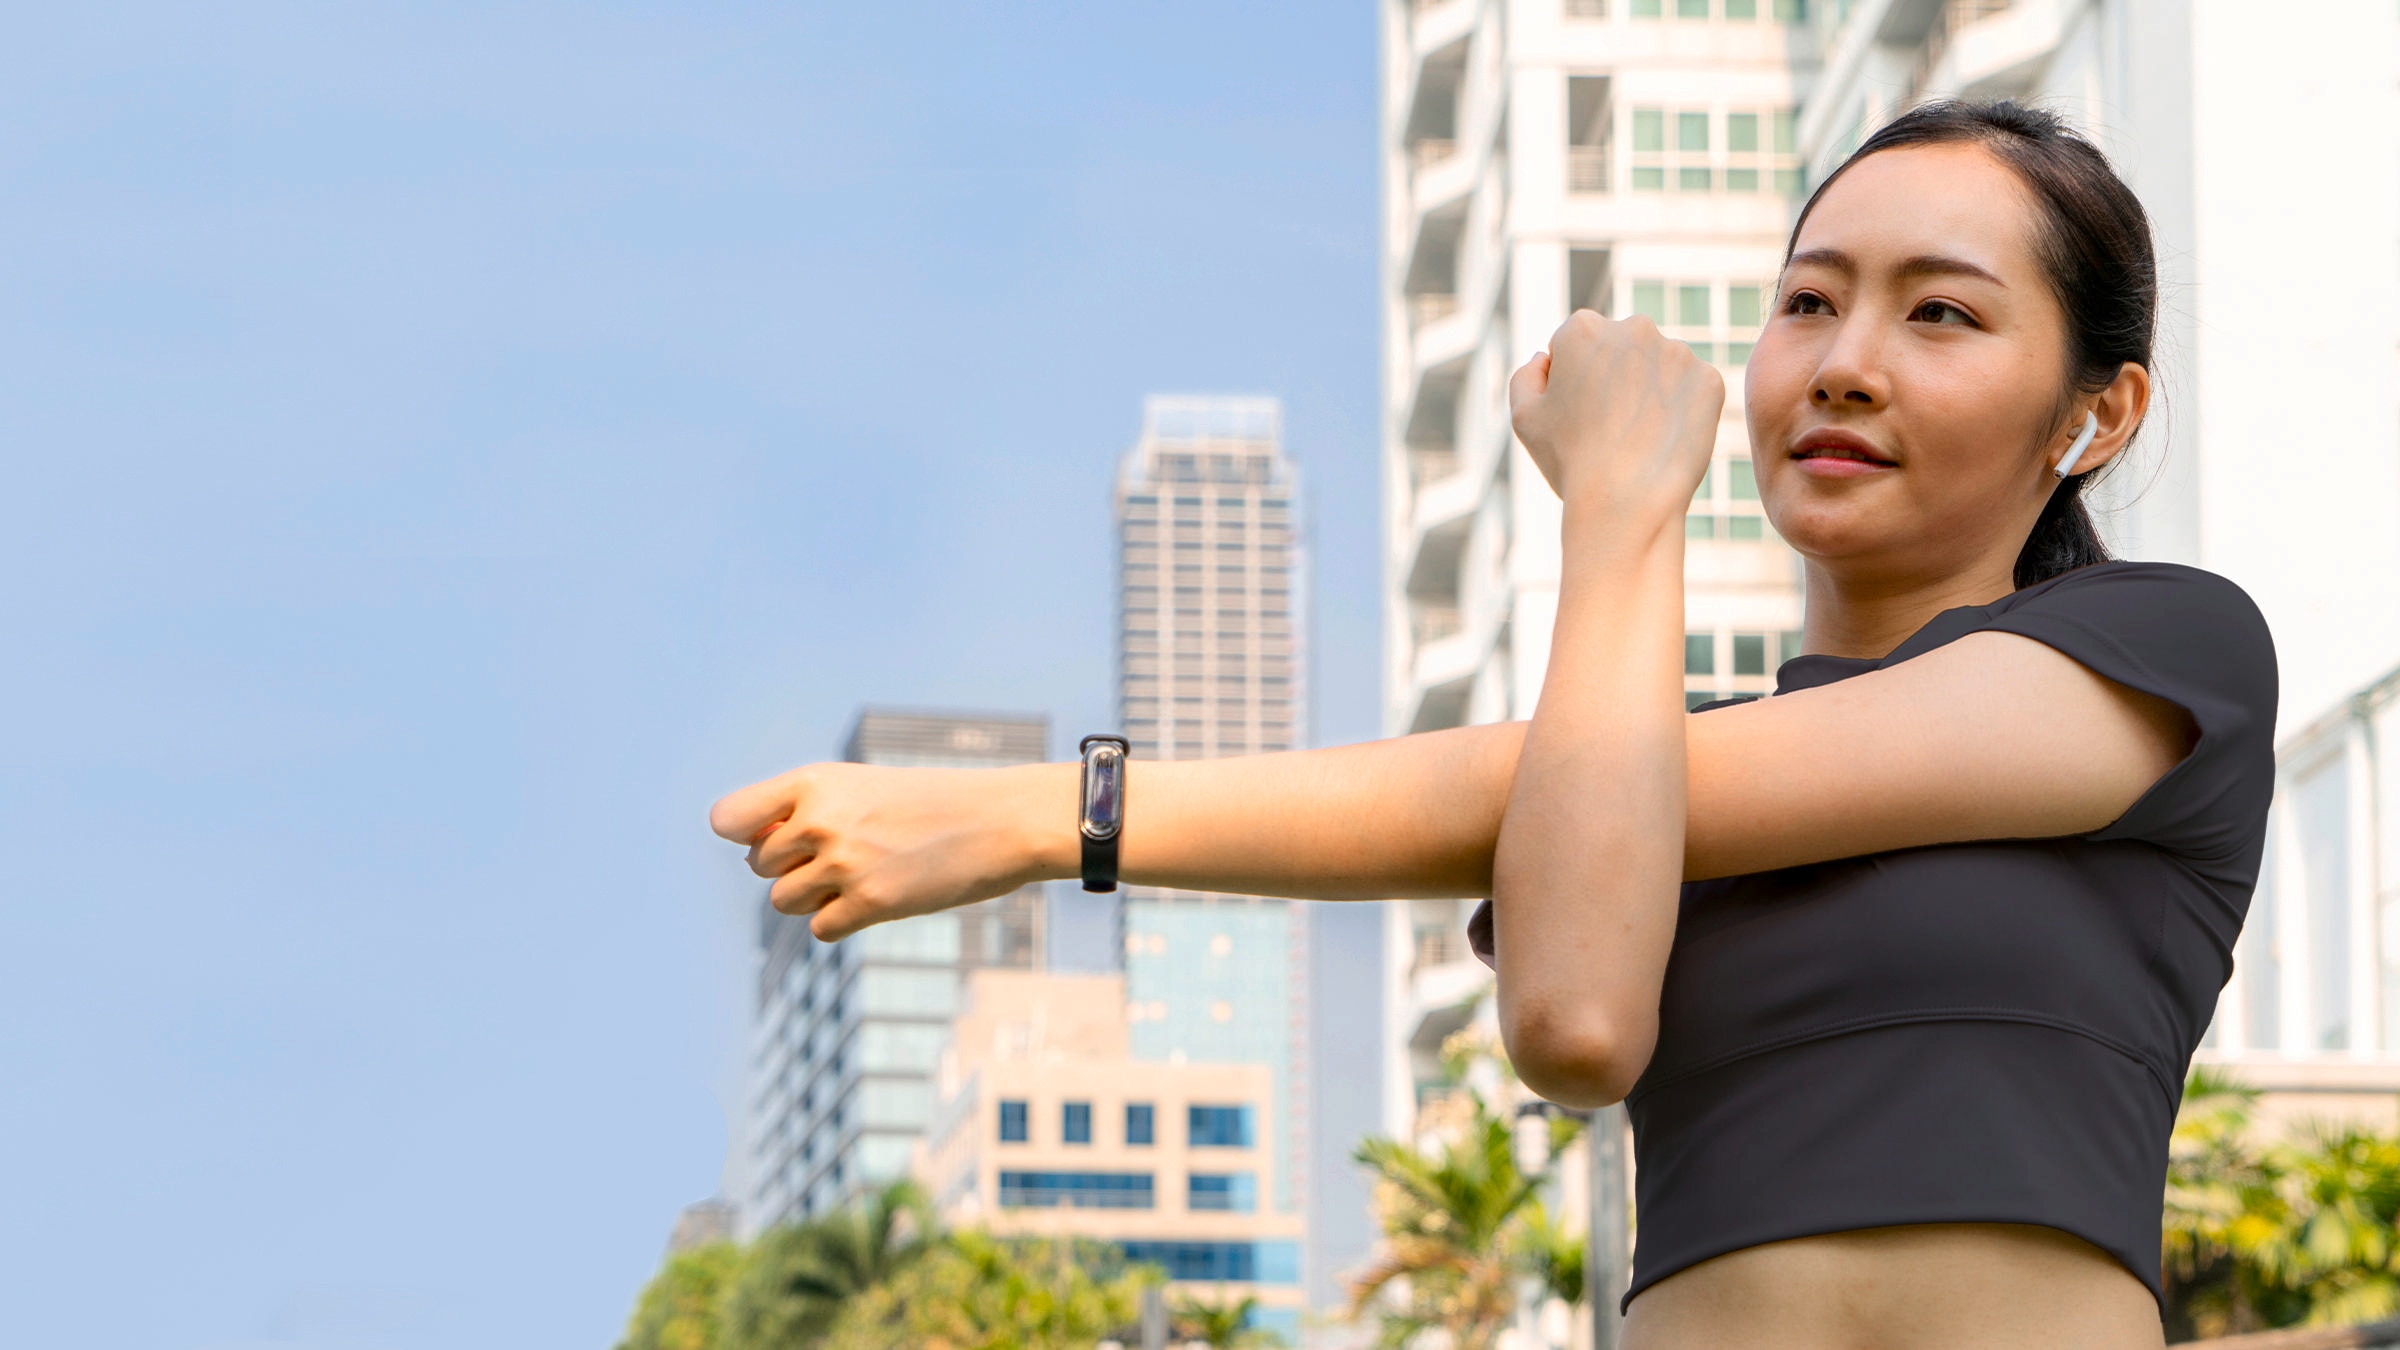 A person is shown outside stretching their arm. They are wearing wireless ear buds and buildings can be seen in the background. 